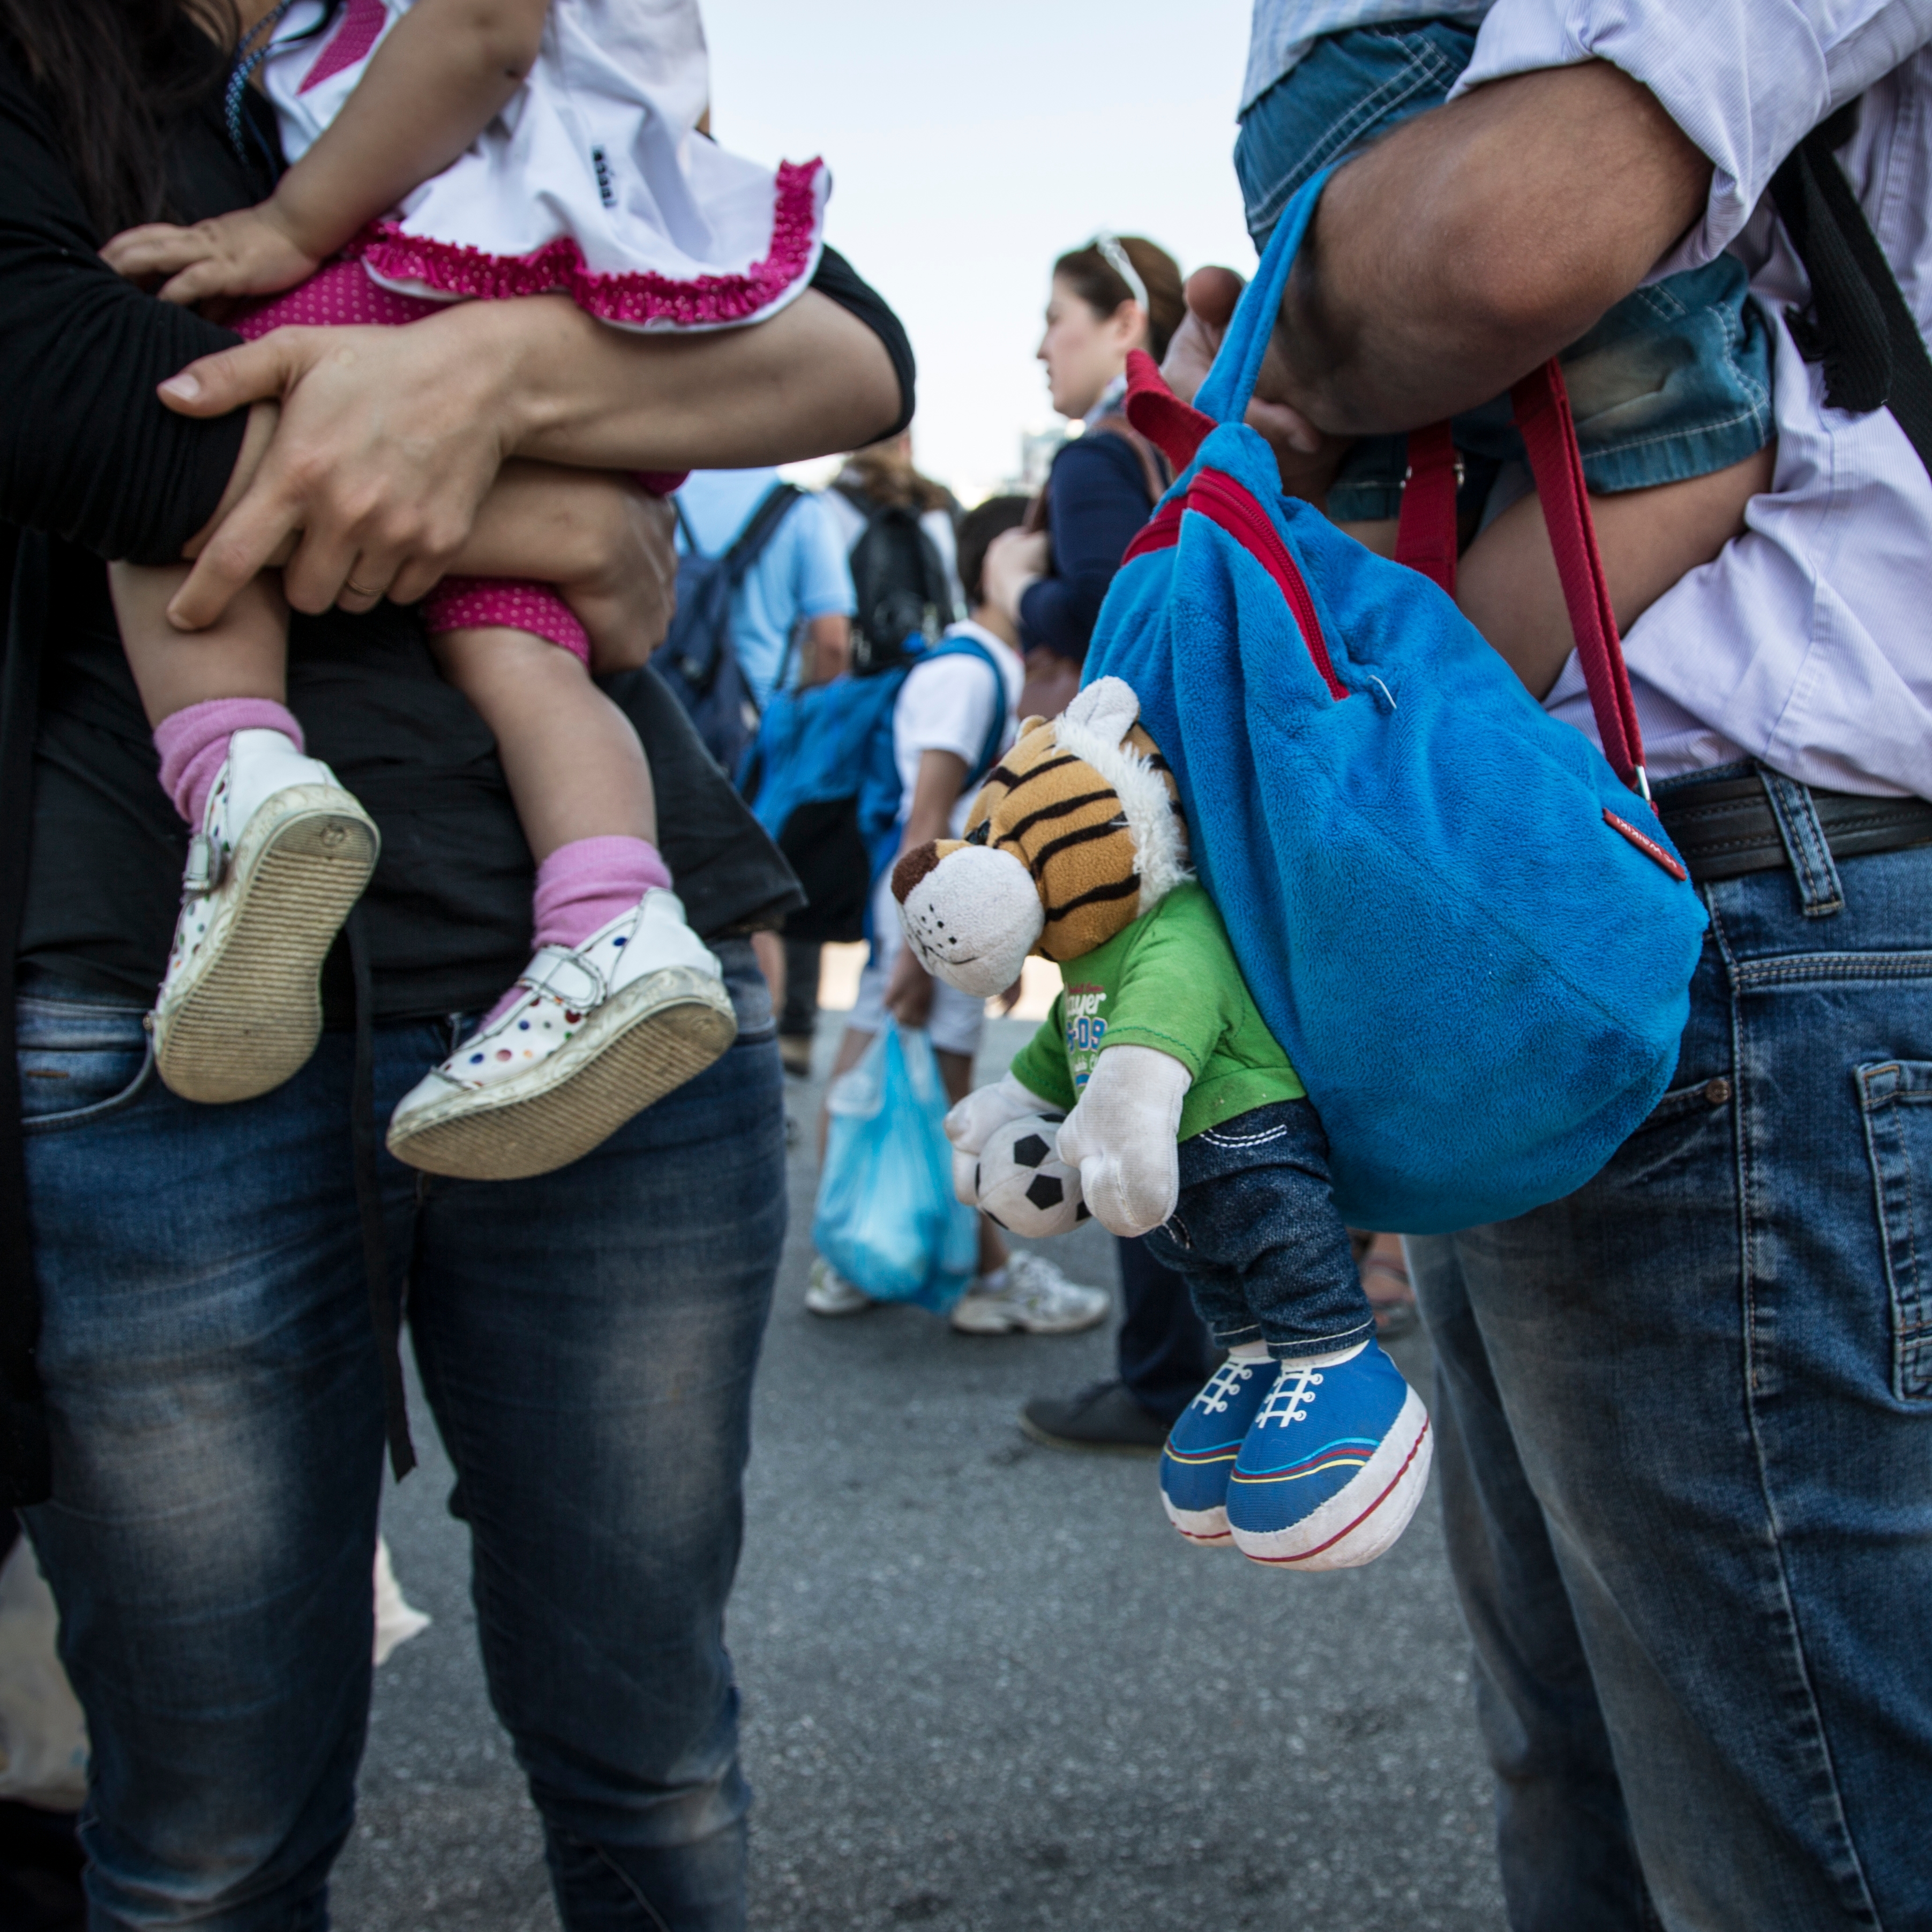 Syrian parents with their children in their arms in Athens, leaving the ferry they travelled on from Kos. "I don’t want to look to the right of me because there is Turkey. And I don’t want to look to the left because there is the island of Kos. The only place to look is ahead, straight to Athens," Farah said. Photo credit: Hedinn Halldorsson/Save the Children 2015.